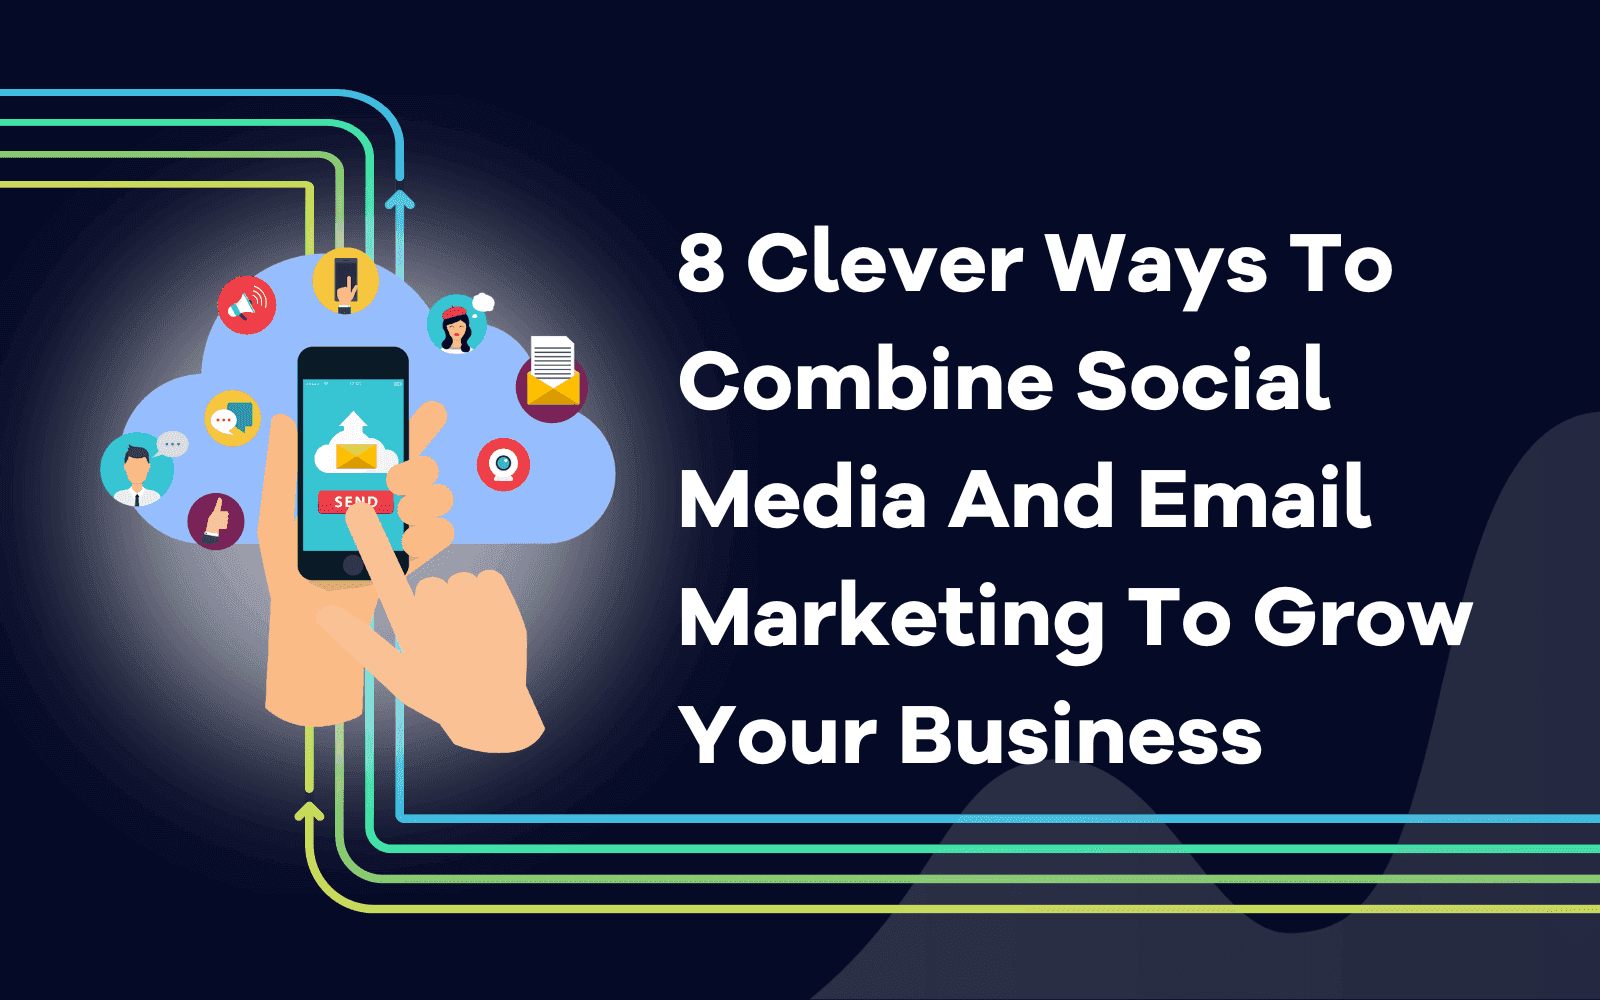 Clever Ways To Combine Social Media And Email Marketing To Grow Your Business